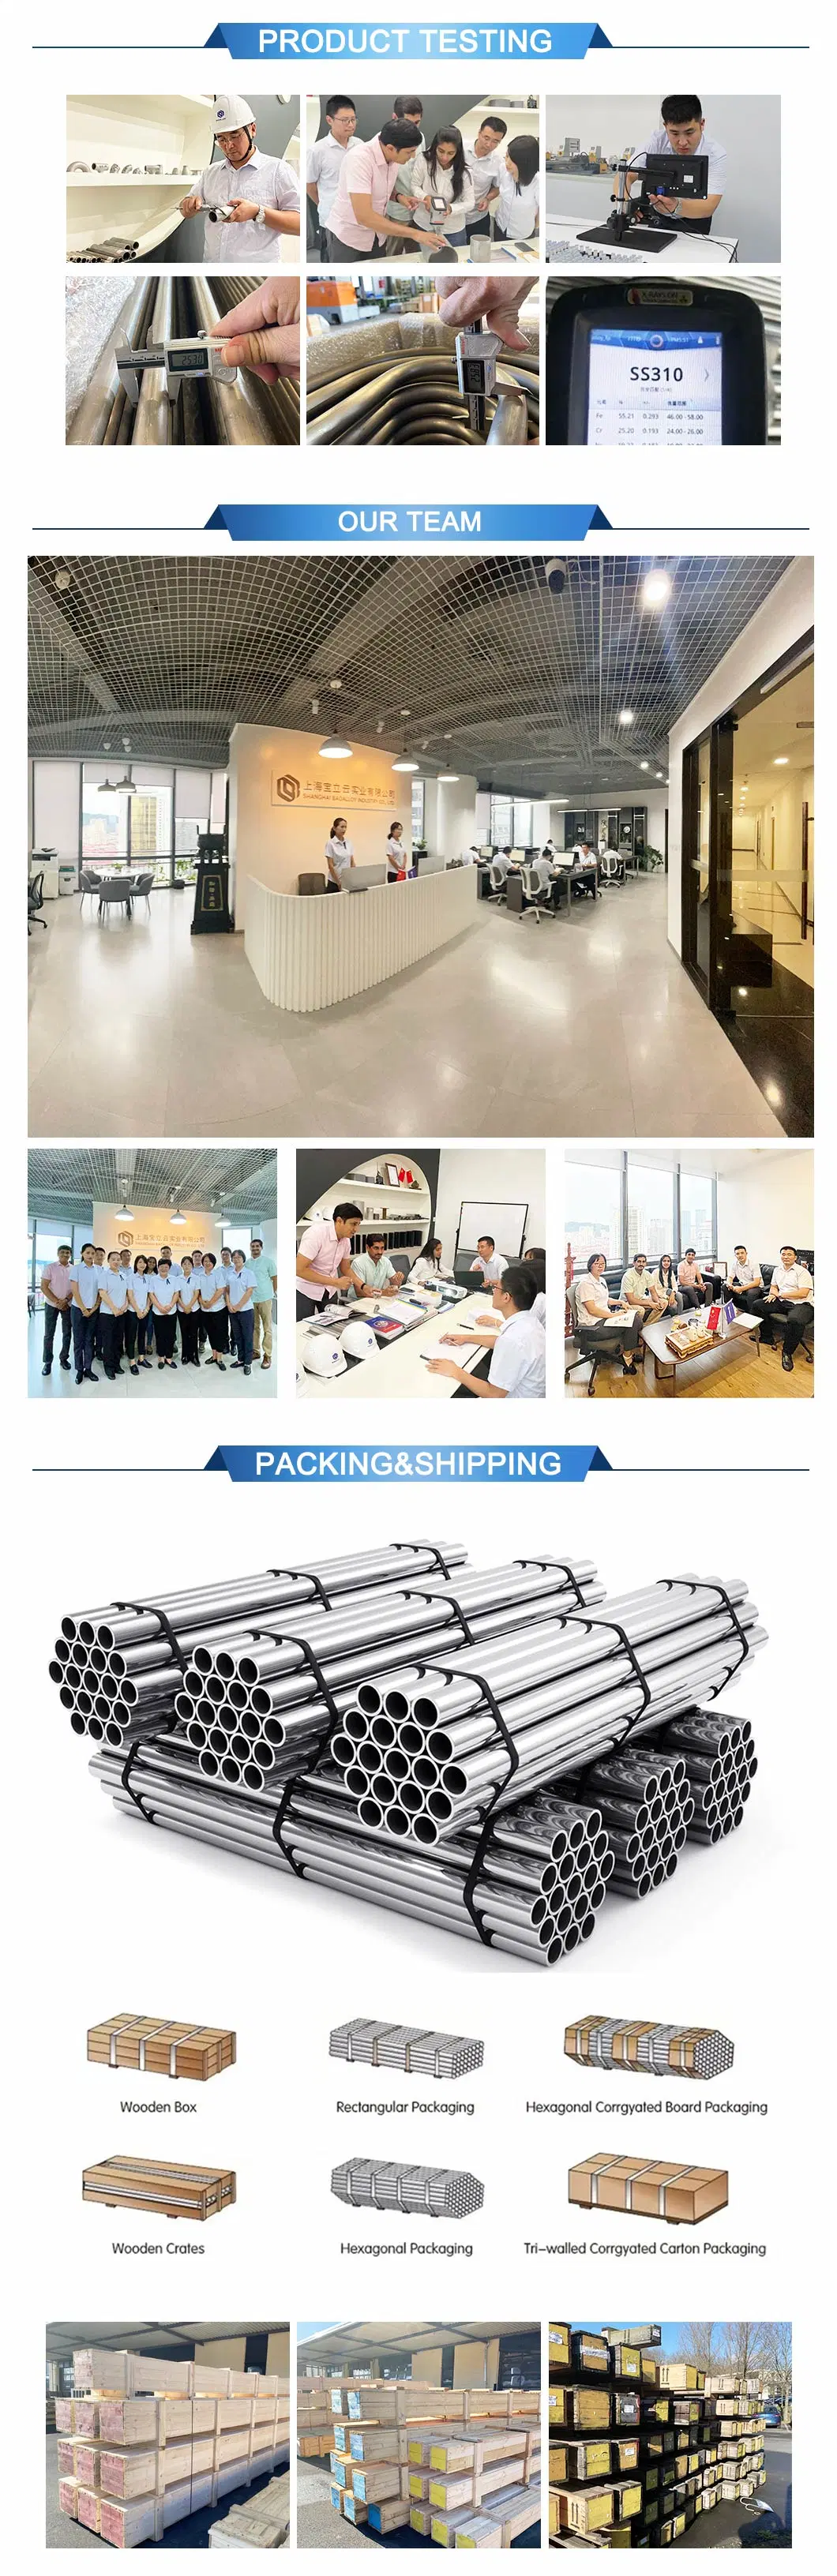 410s 410L Household Electrical Appliance Steel Stainless Steel Tube Stainless Steel Pipe